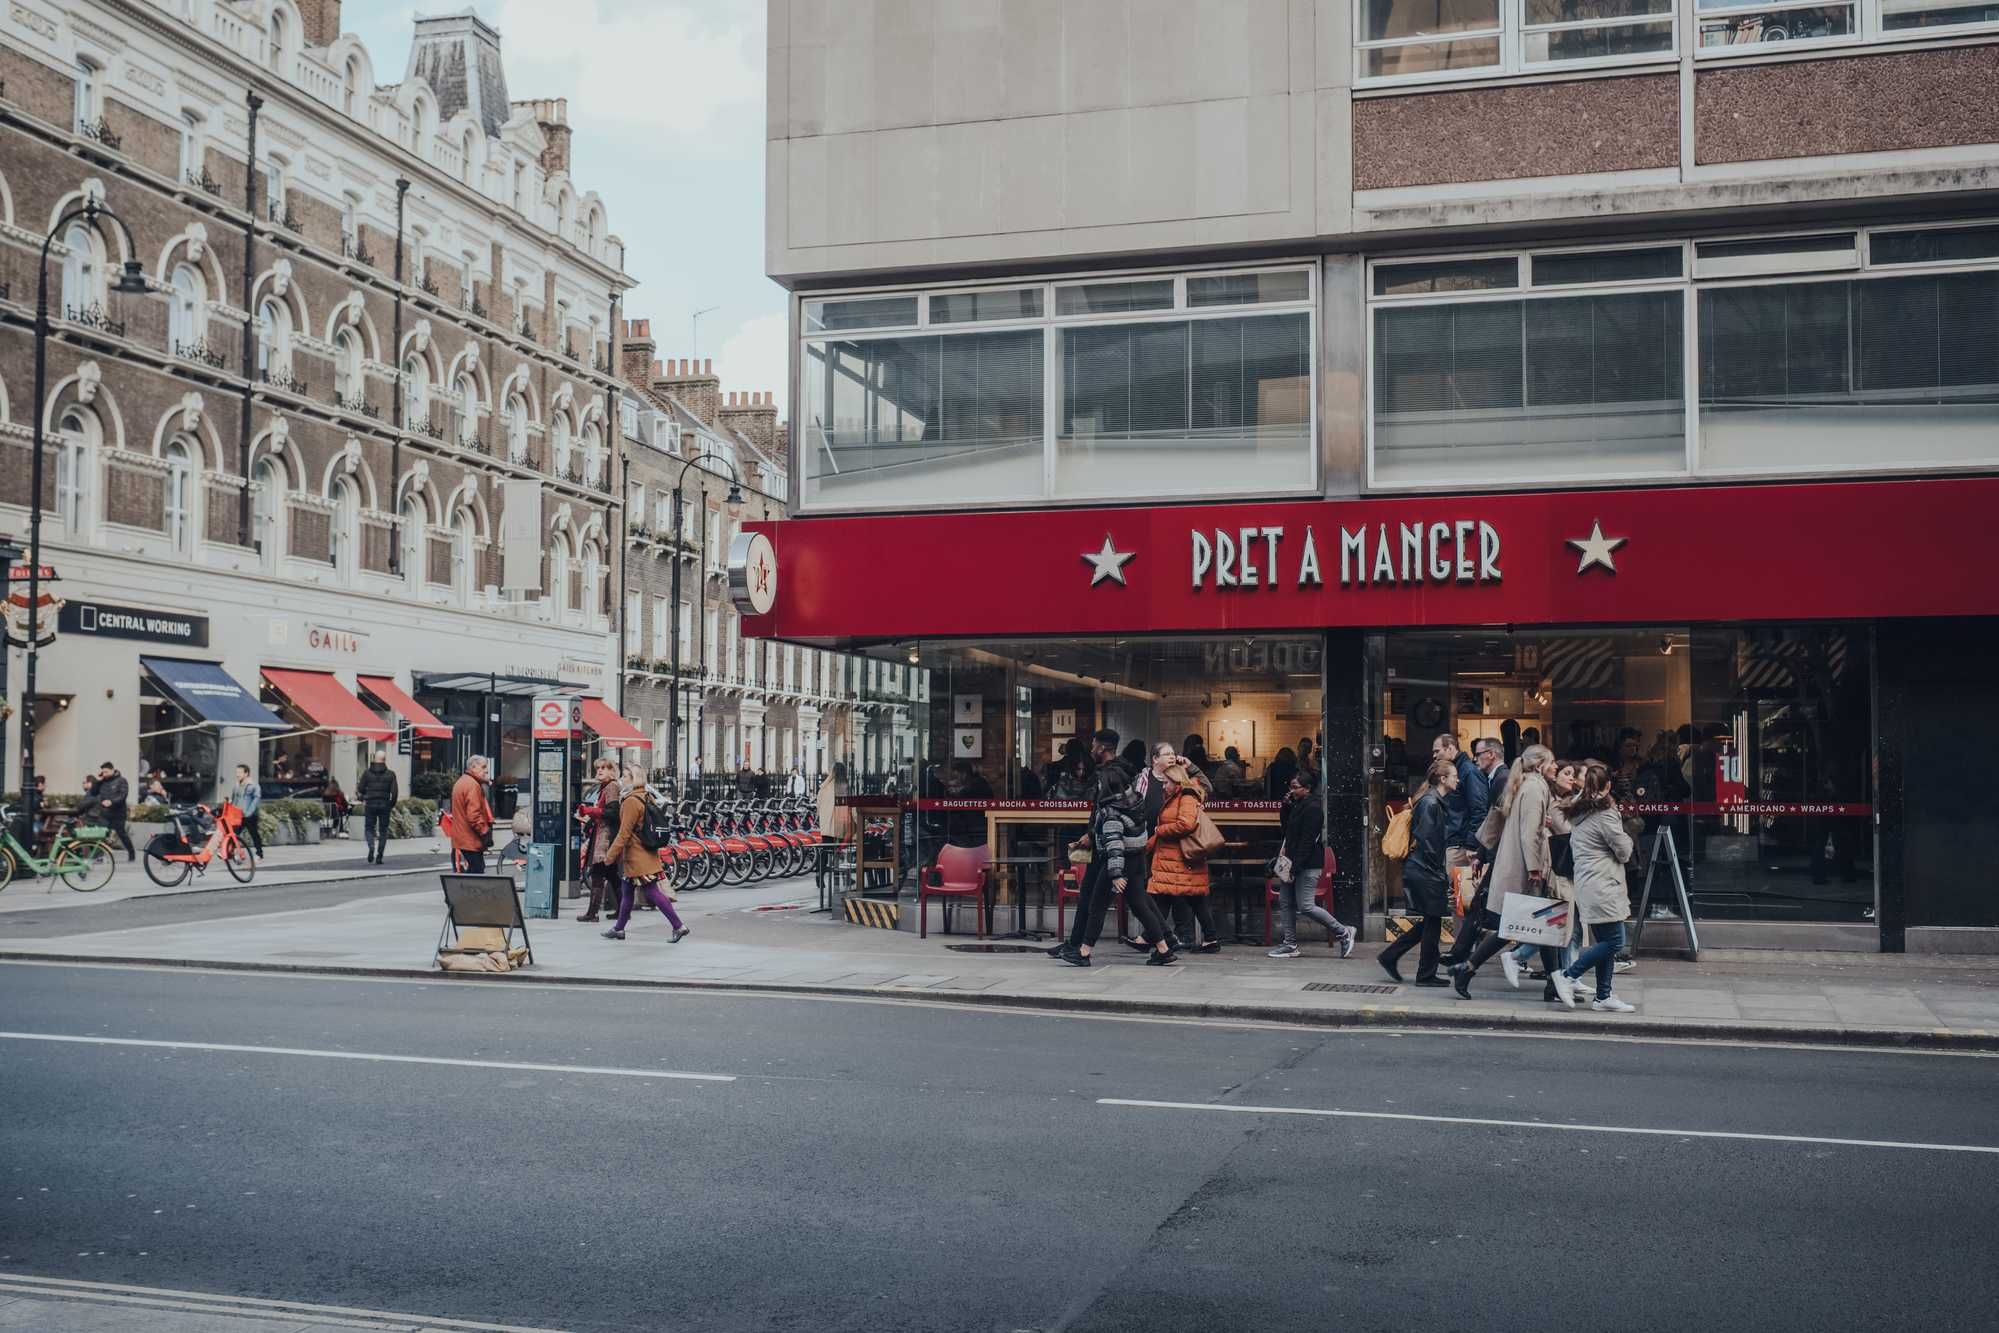 Pret A Manger allegedly mislead consumers with "natural" advertising.